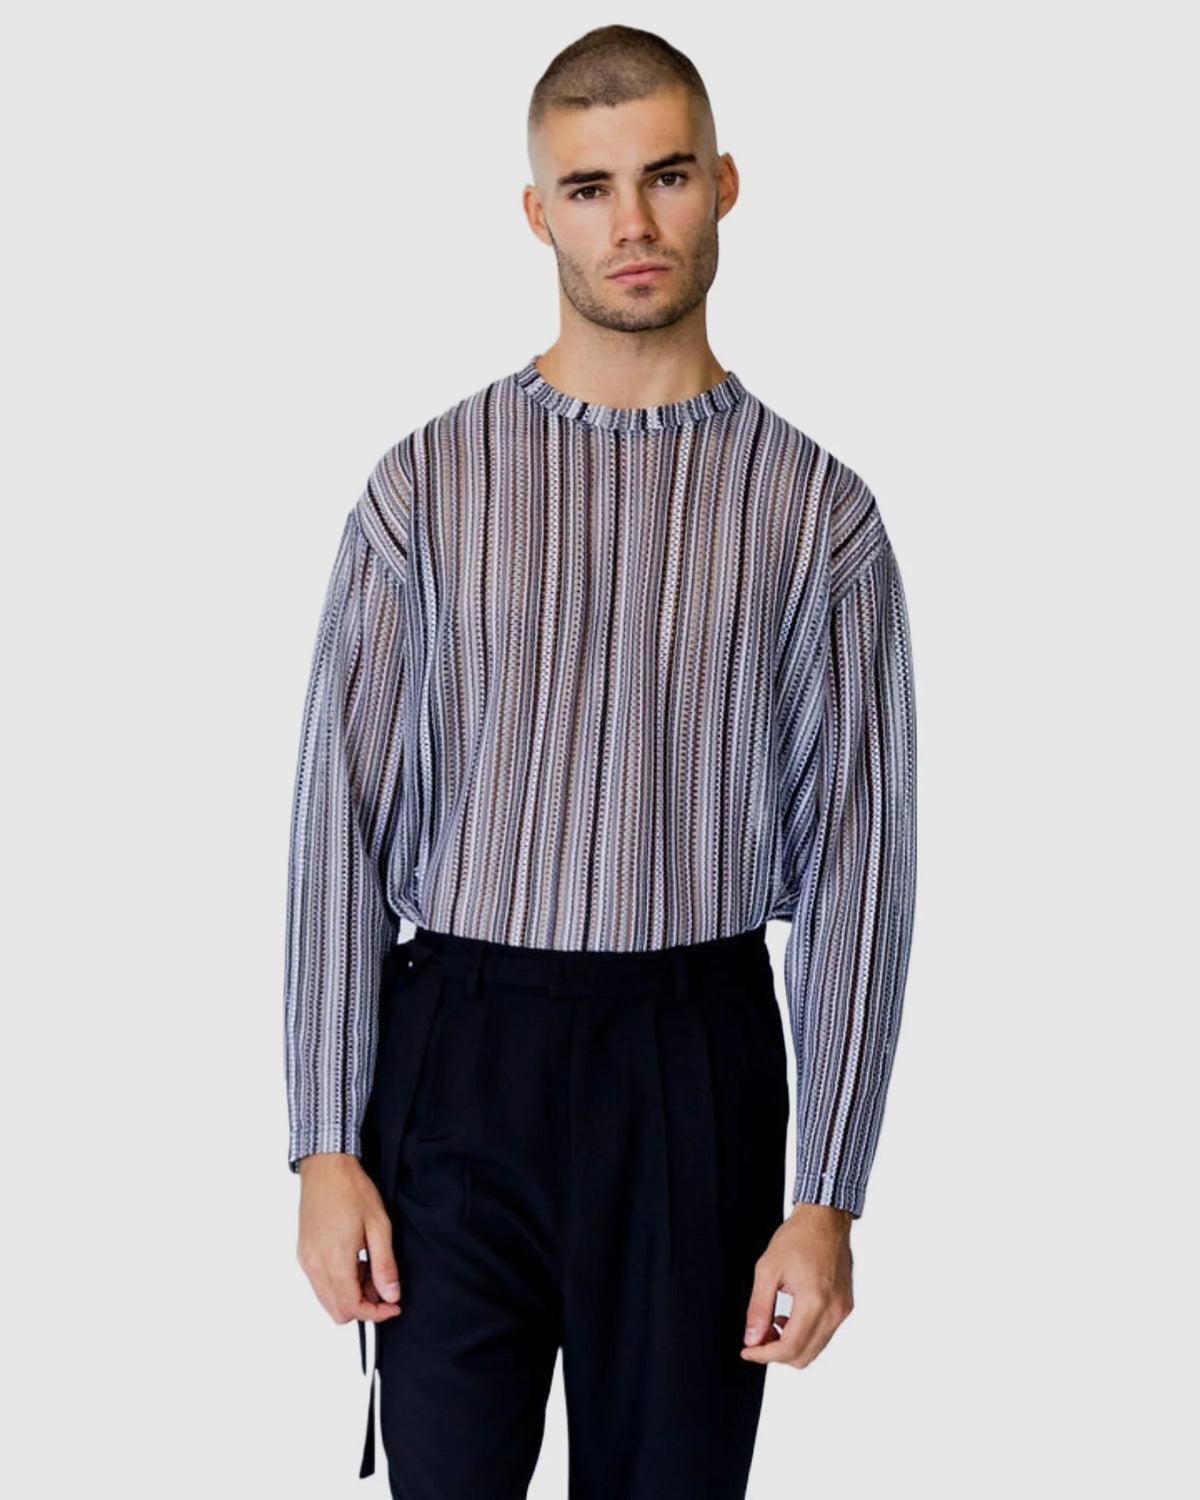 Justin Cassin Chad Sheer Stripe Top in Grey Color